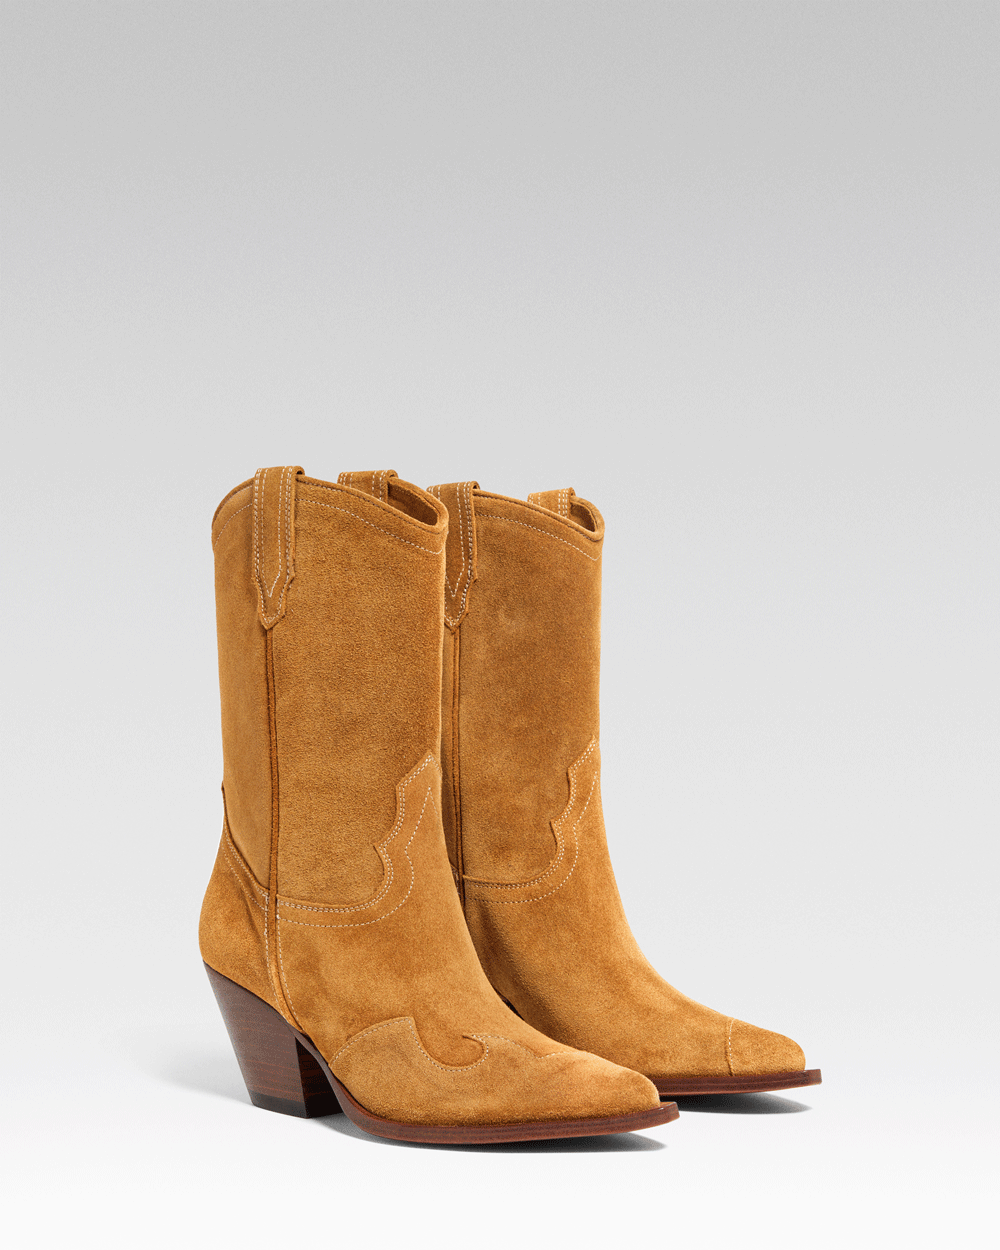 SANTA CLARA Women's Ankle Boots in Camel Suede